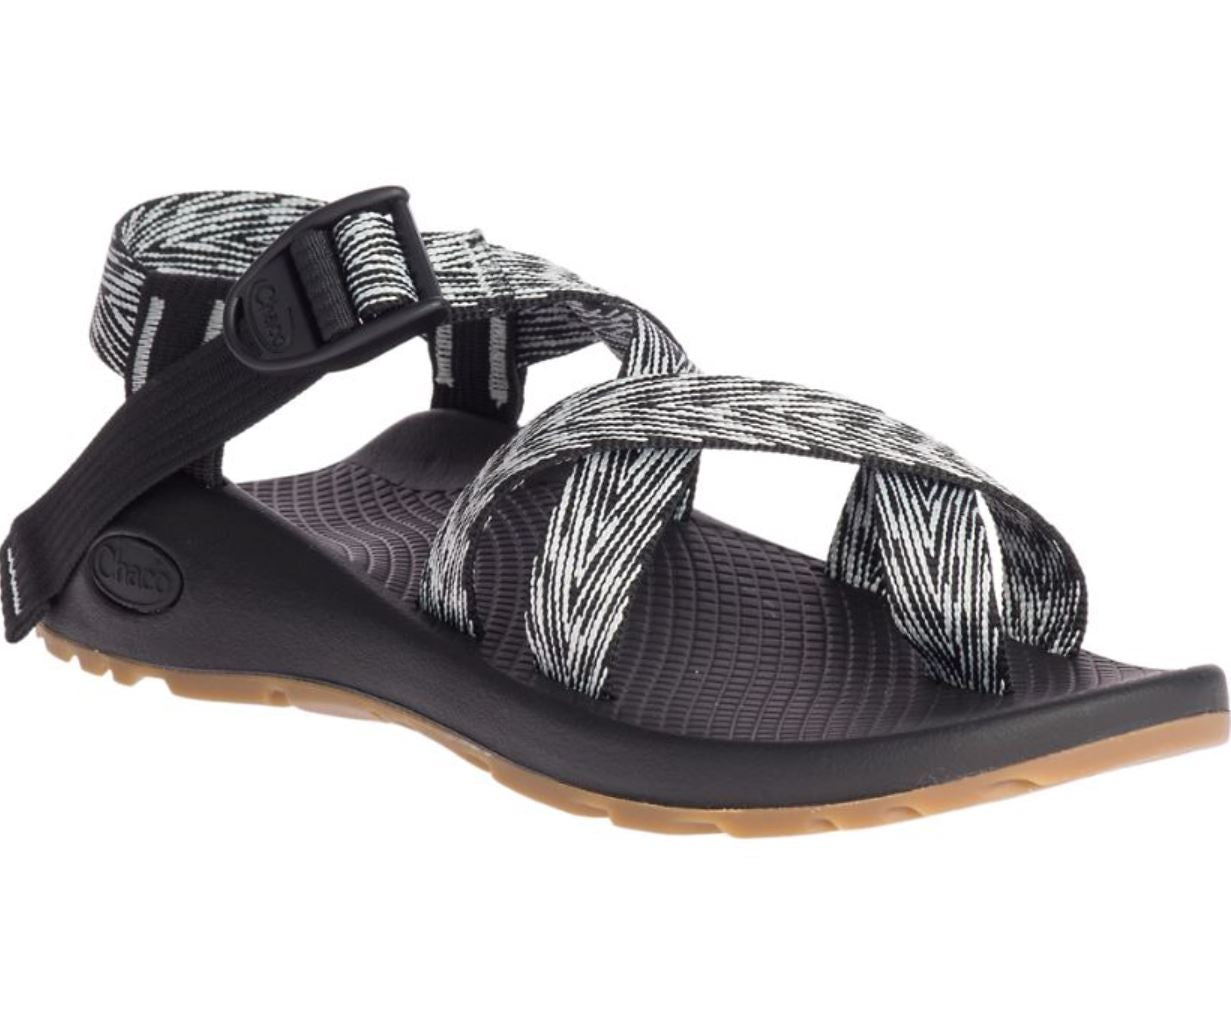 3/4 view of the chaco womens z2 classic sandal in the color noir